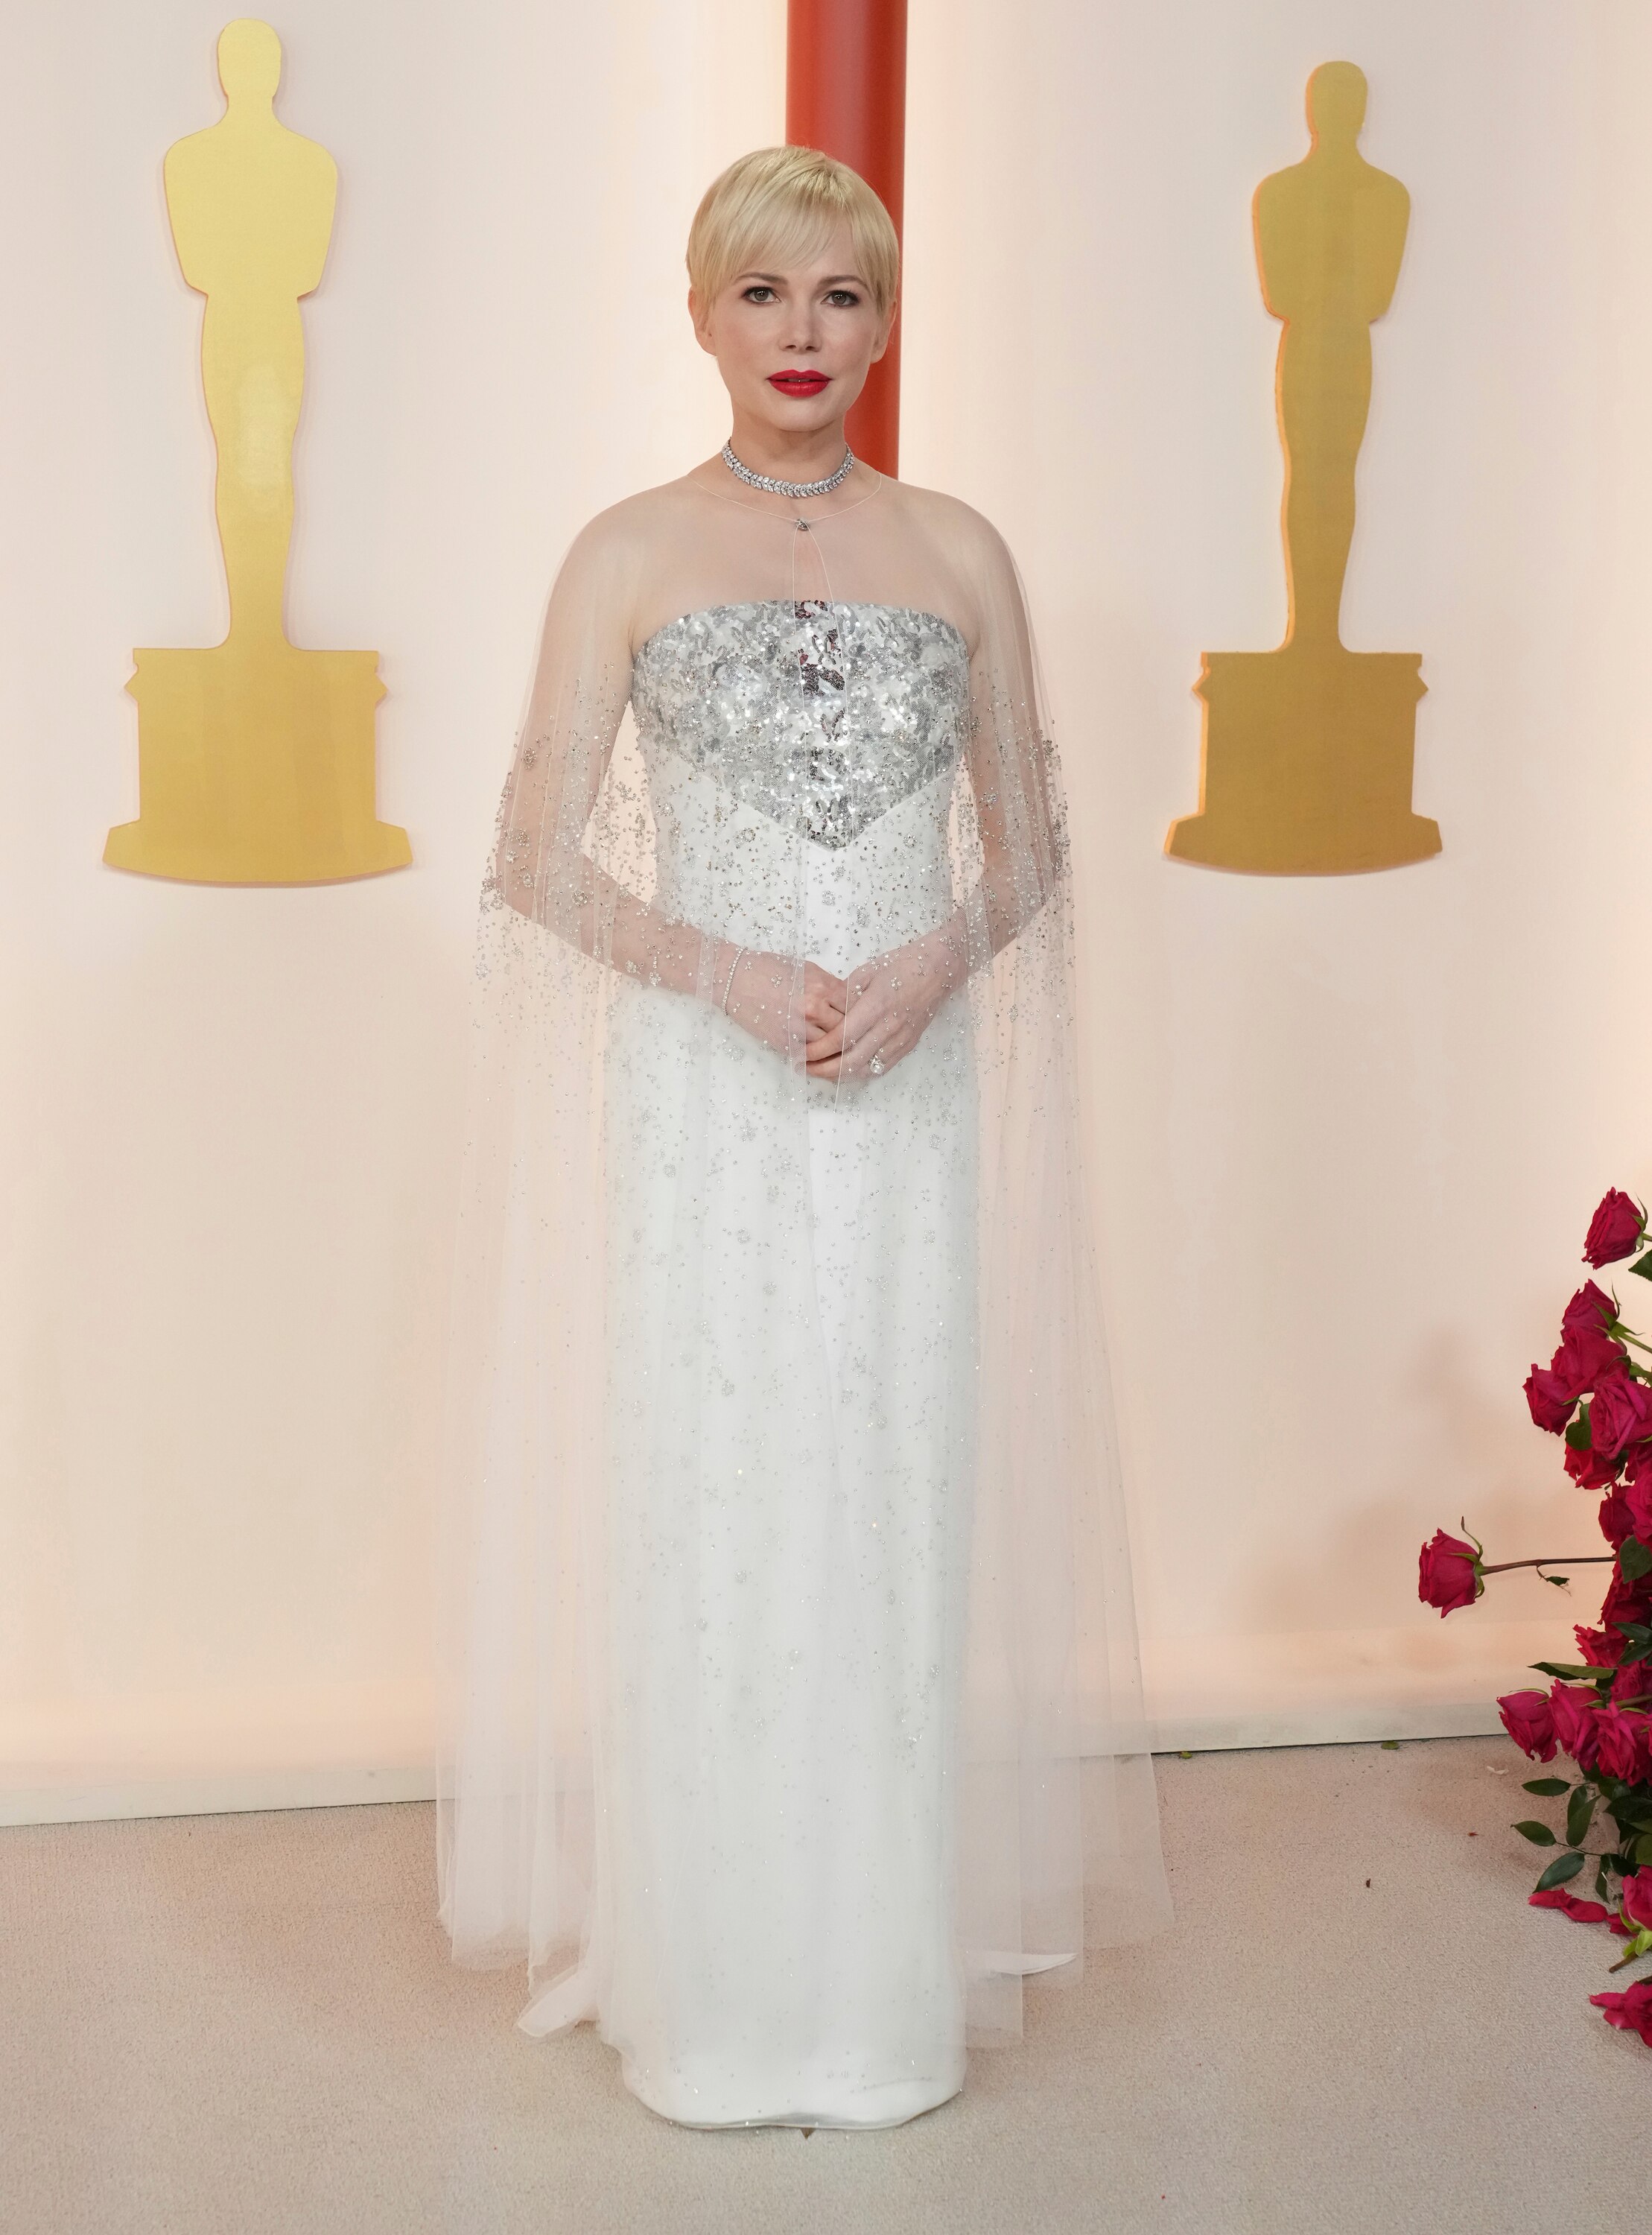 Michelle Williams wearing a strapless white floor-length gown with silver metallic detailing on the bust and a sheer white cape